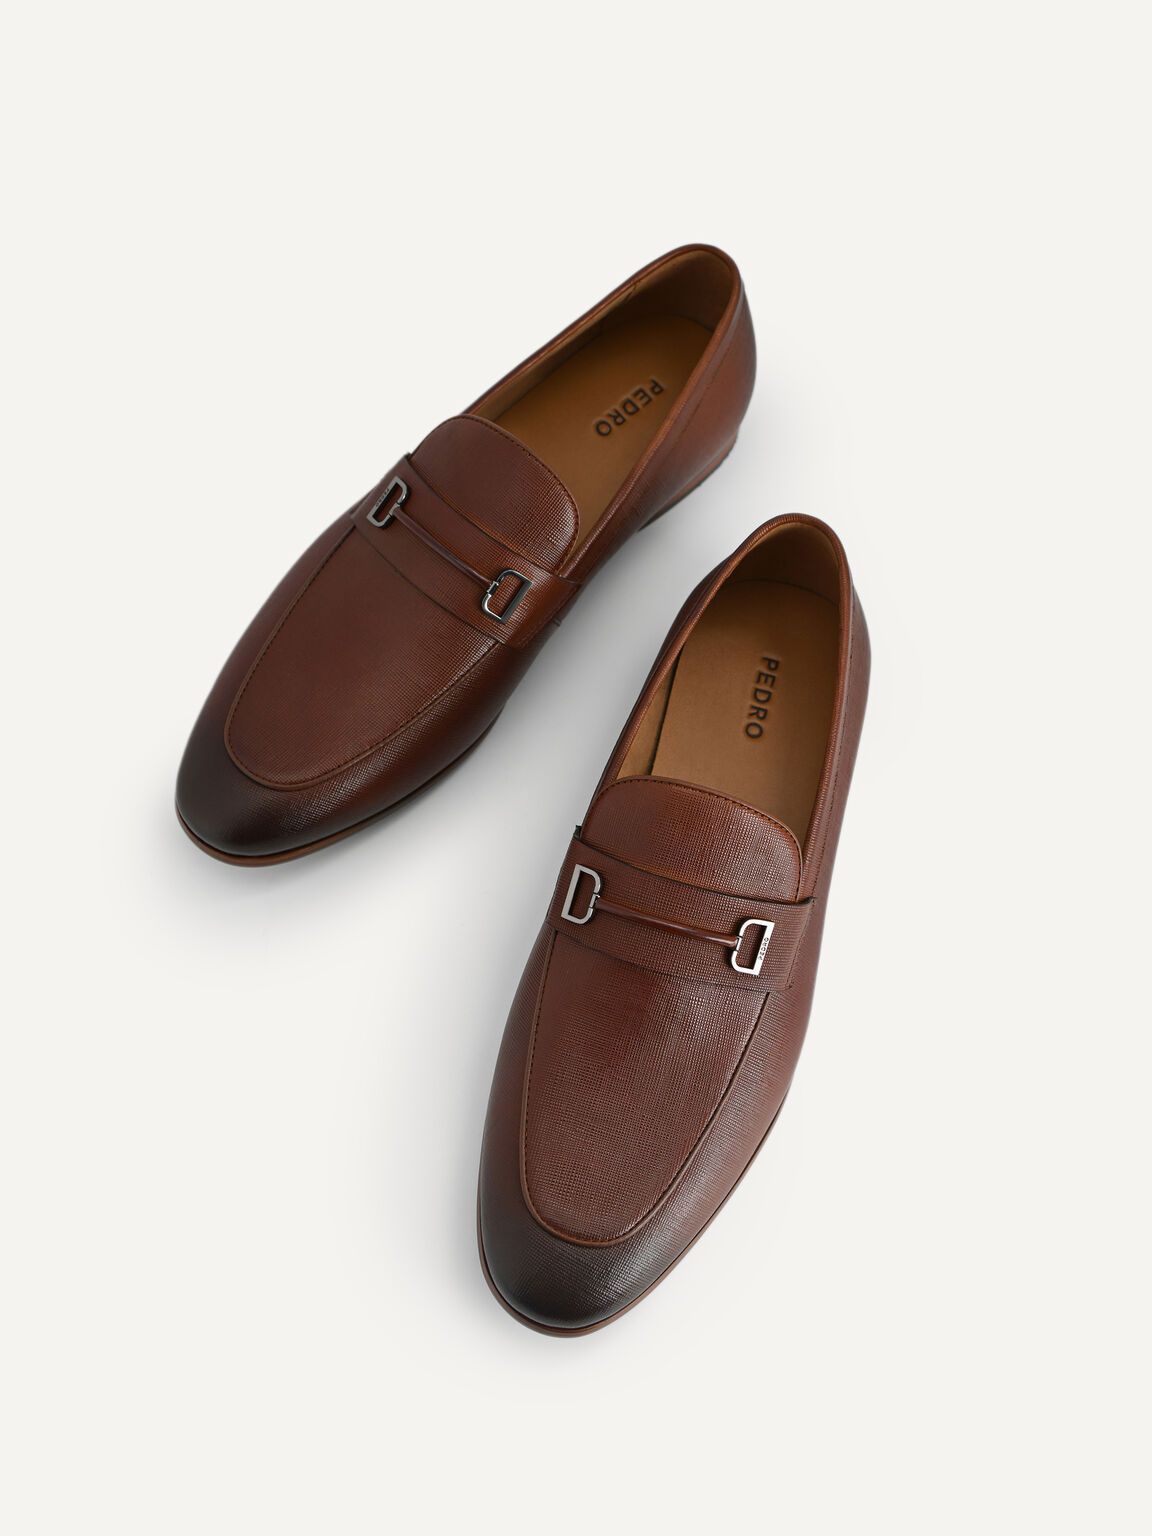 Textured Leather Loafers with Metal Bit, Cognac